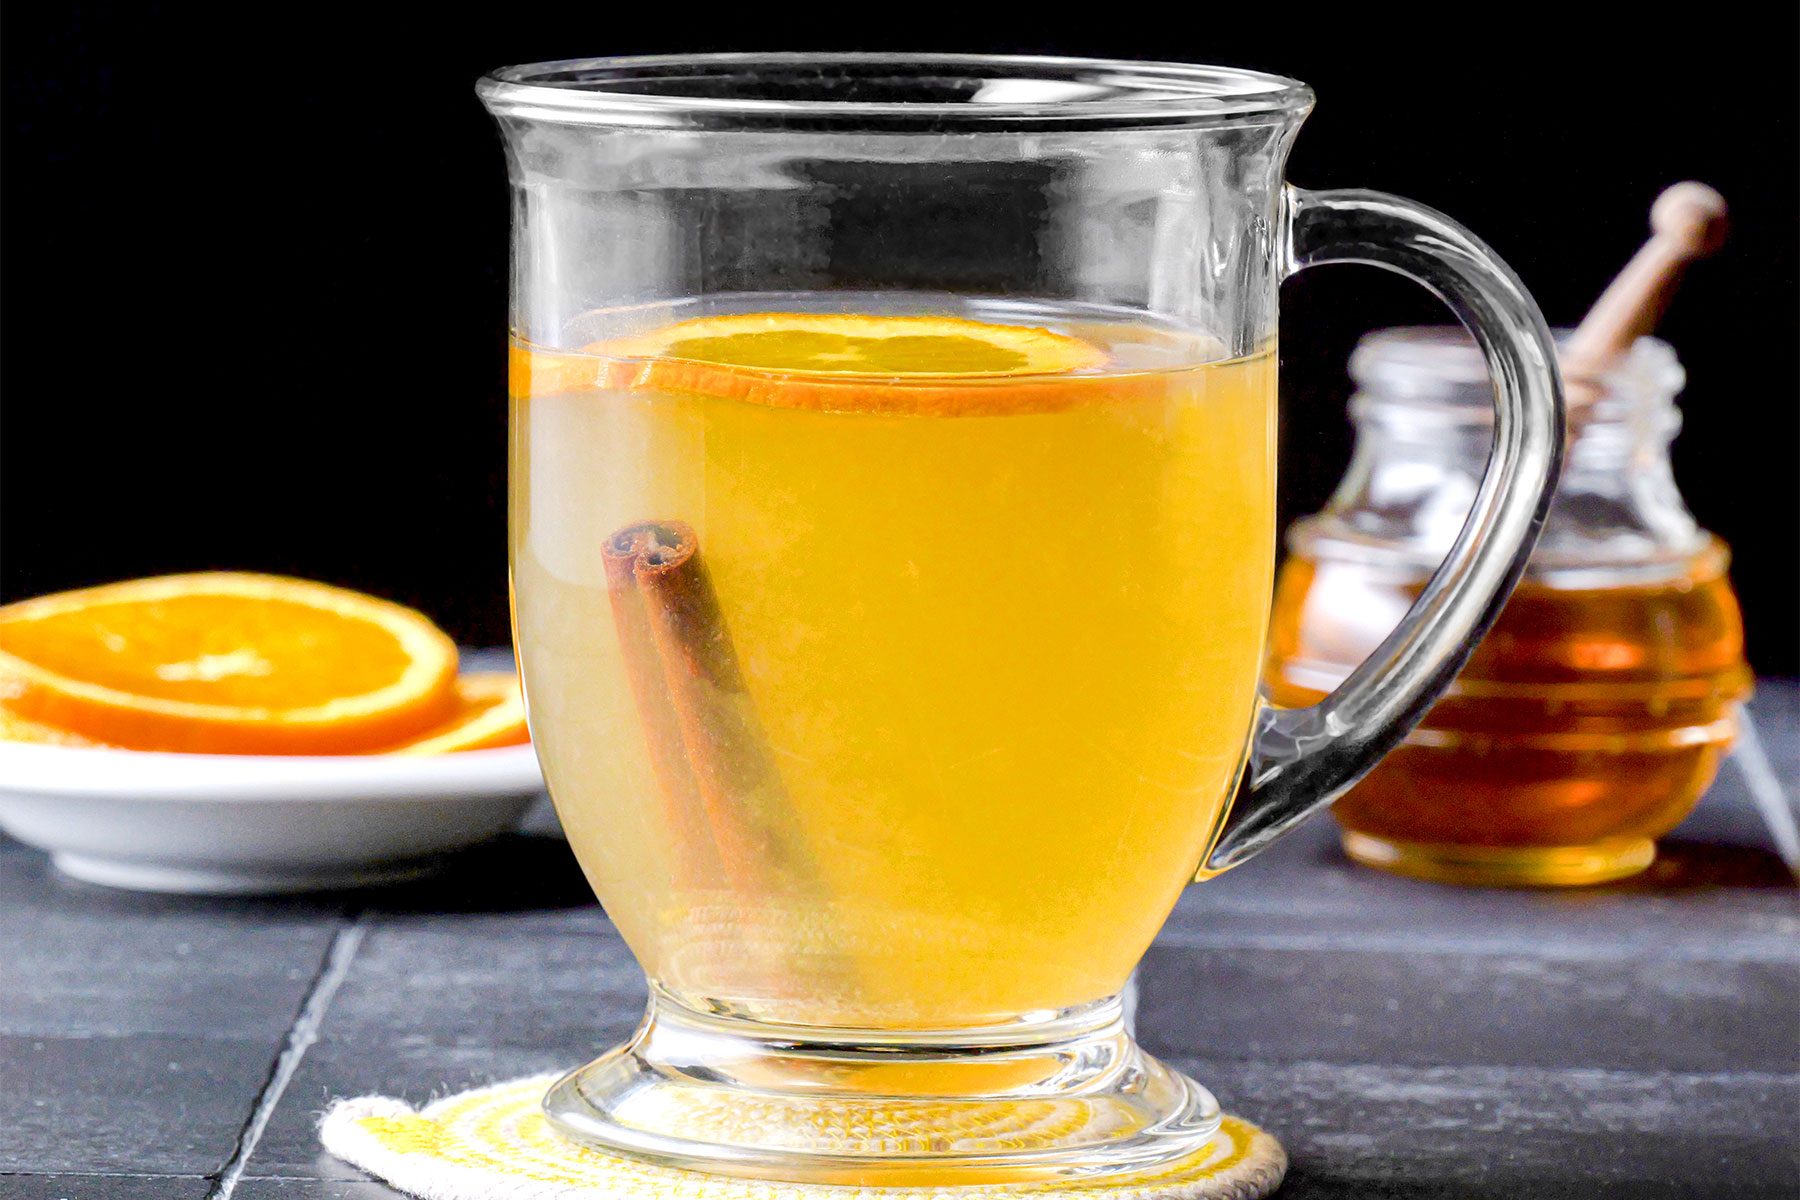 Hot Toddy served in large mug with cinnamon stick